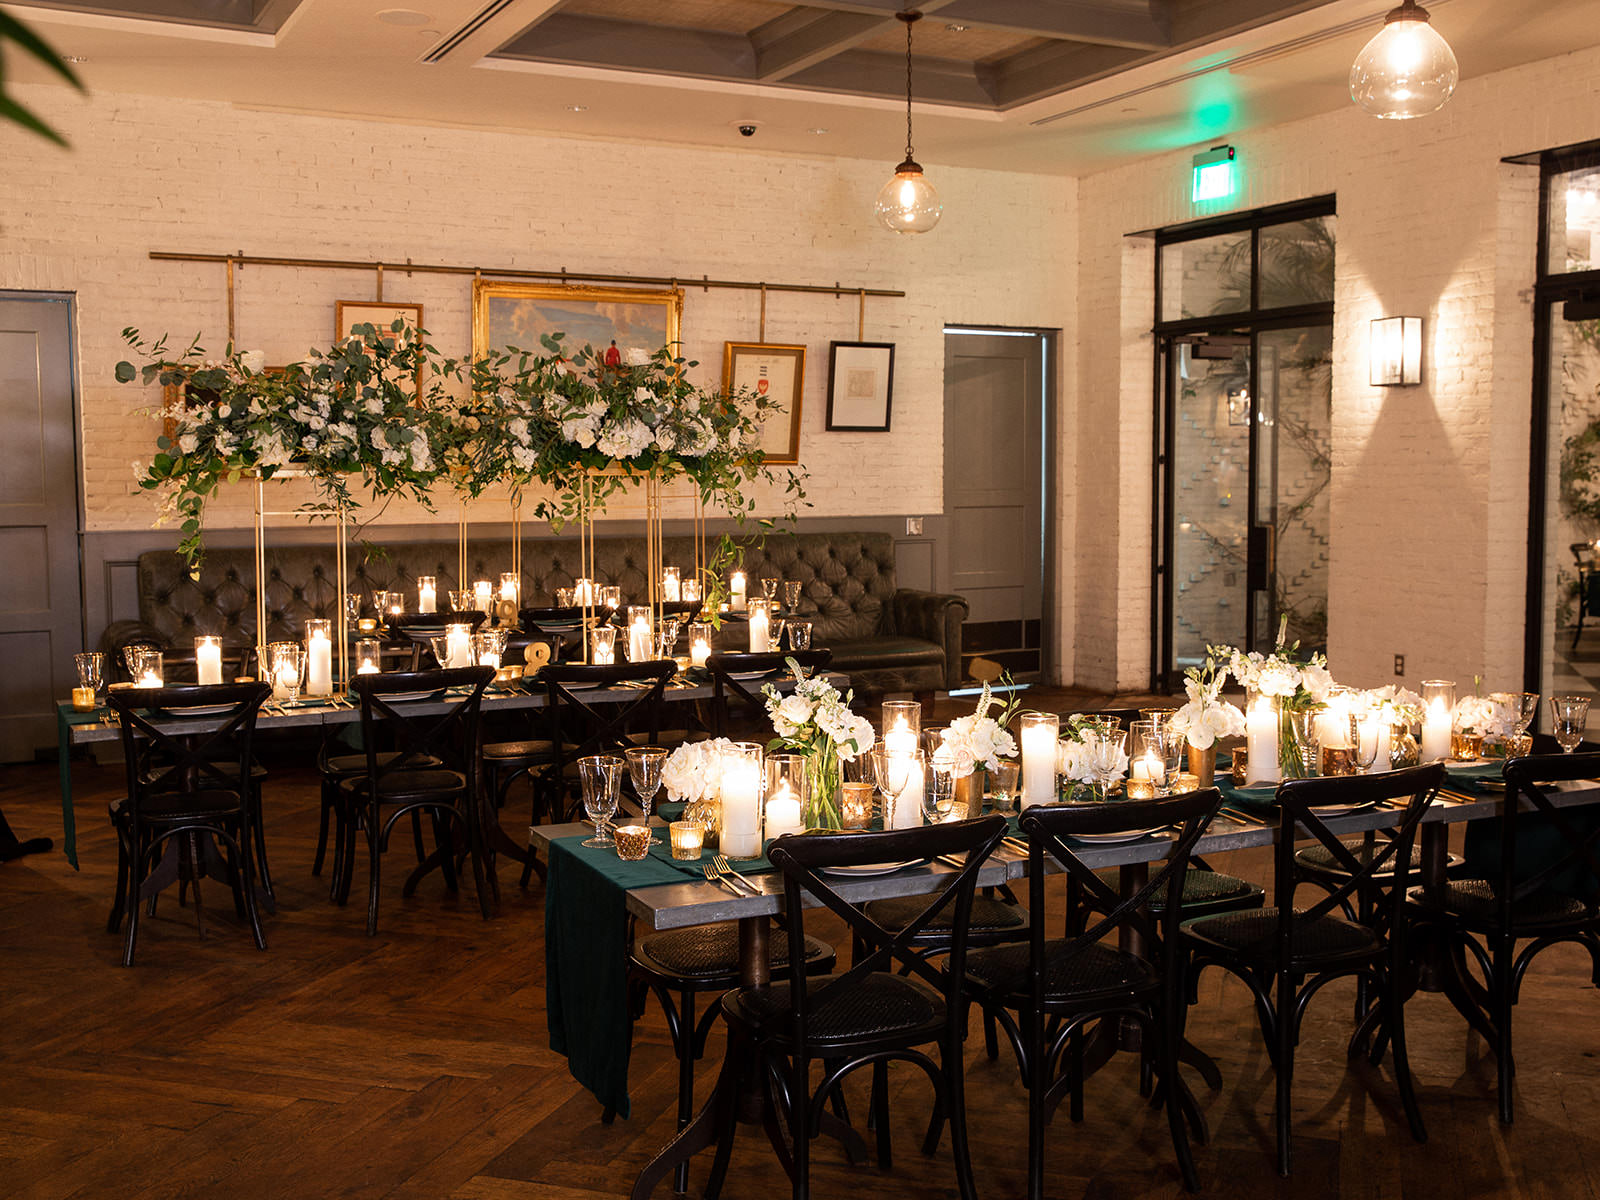 Classic Elegant Wedding Reception Decor, Long Feasting Tables, Black Cross Back Chairs, Green Linen Table Runners, Candles, Tall Gold Stands with Lush White Flowers and Greenery | Tampa Bay Wedding Florist Botanica | Wedding Venue Oxford Exchange